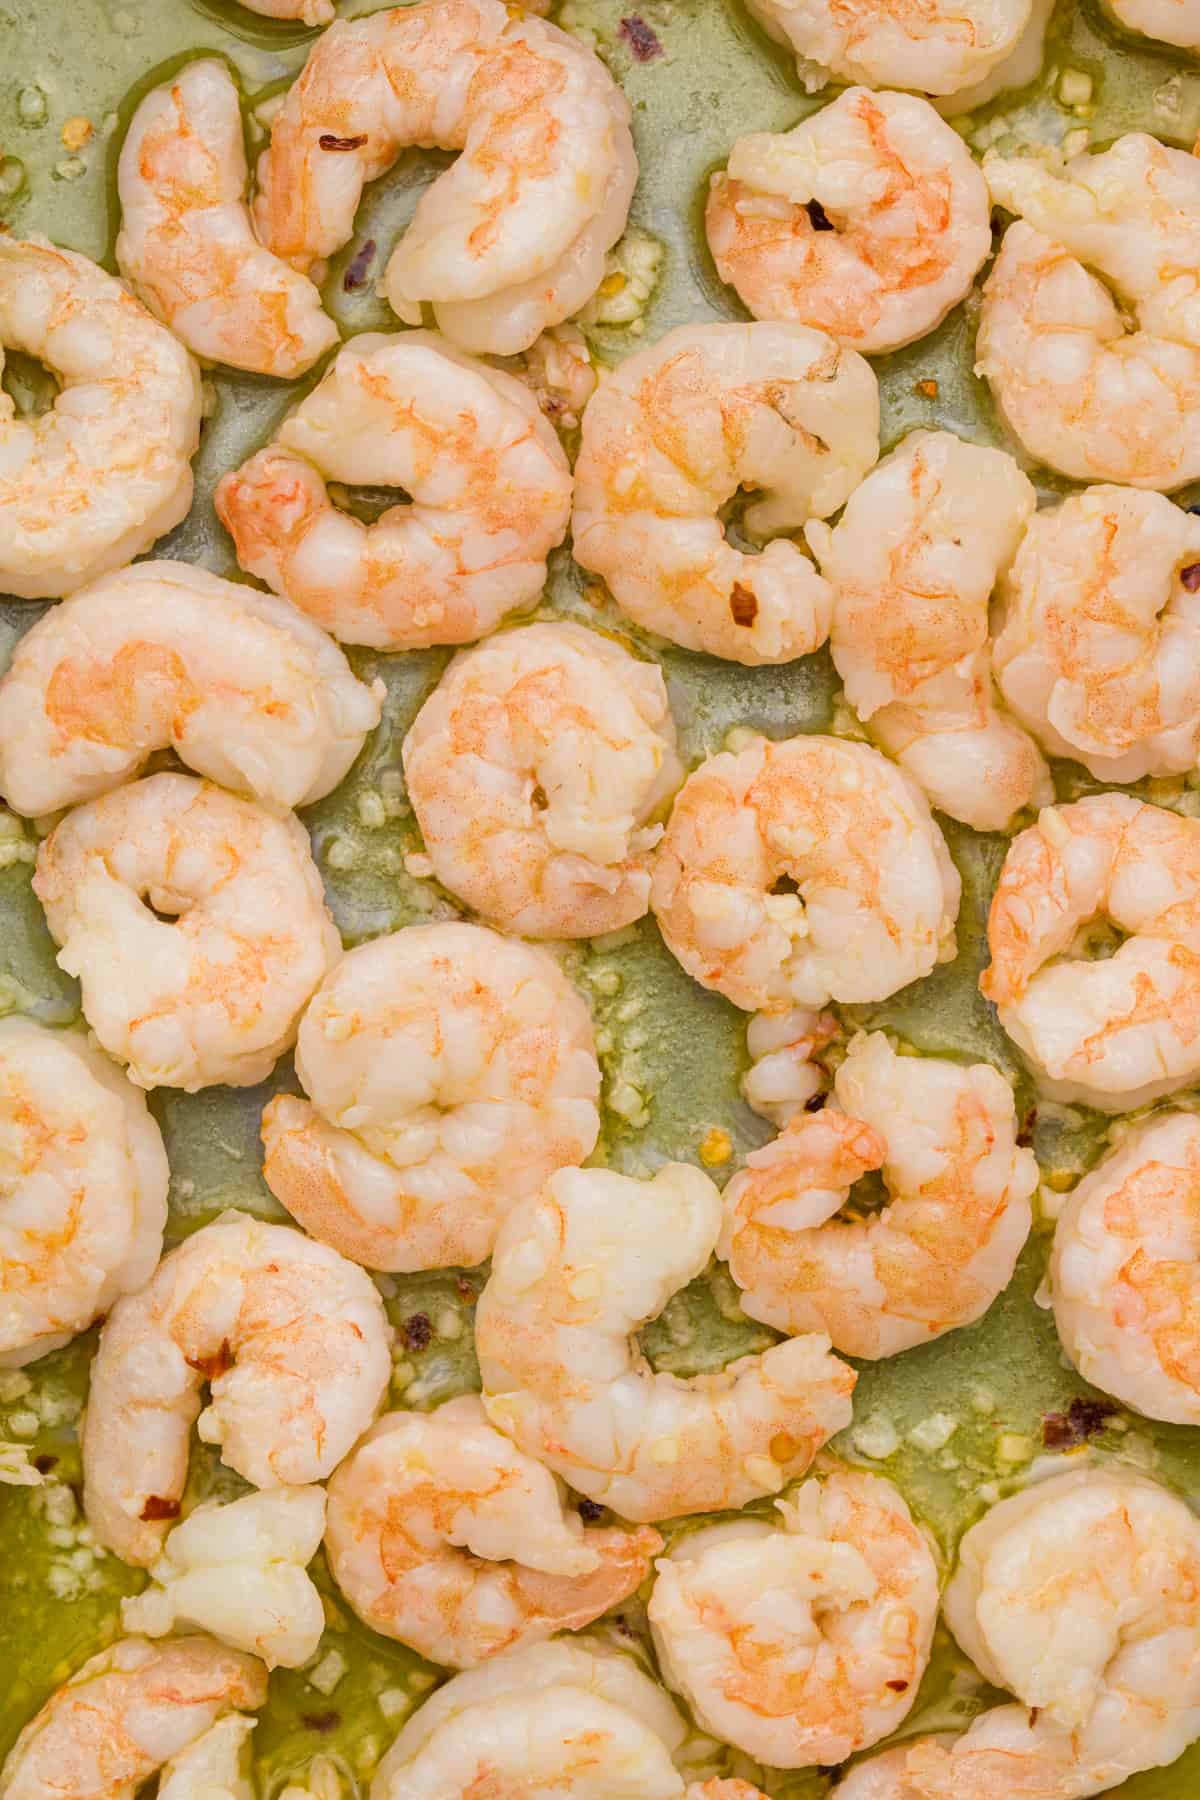 Shrimp cooking in oil and butter with minced garlic in a skillet.